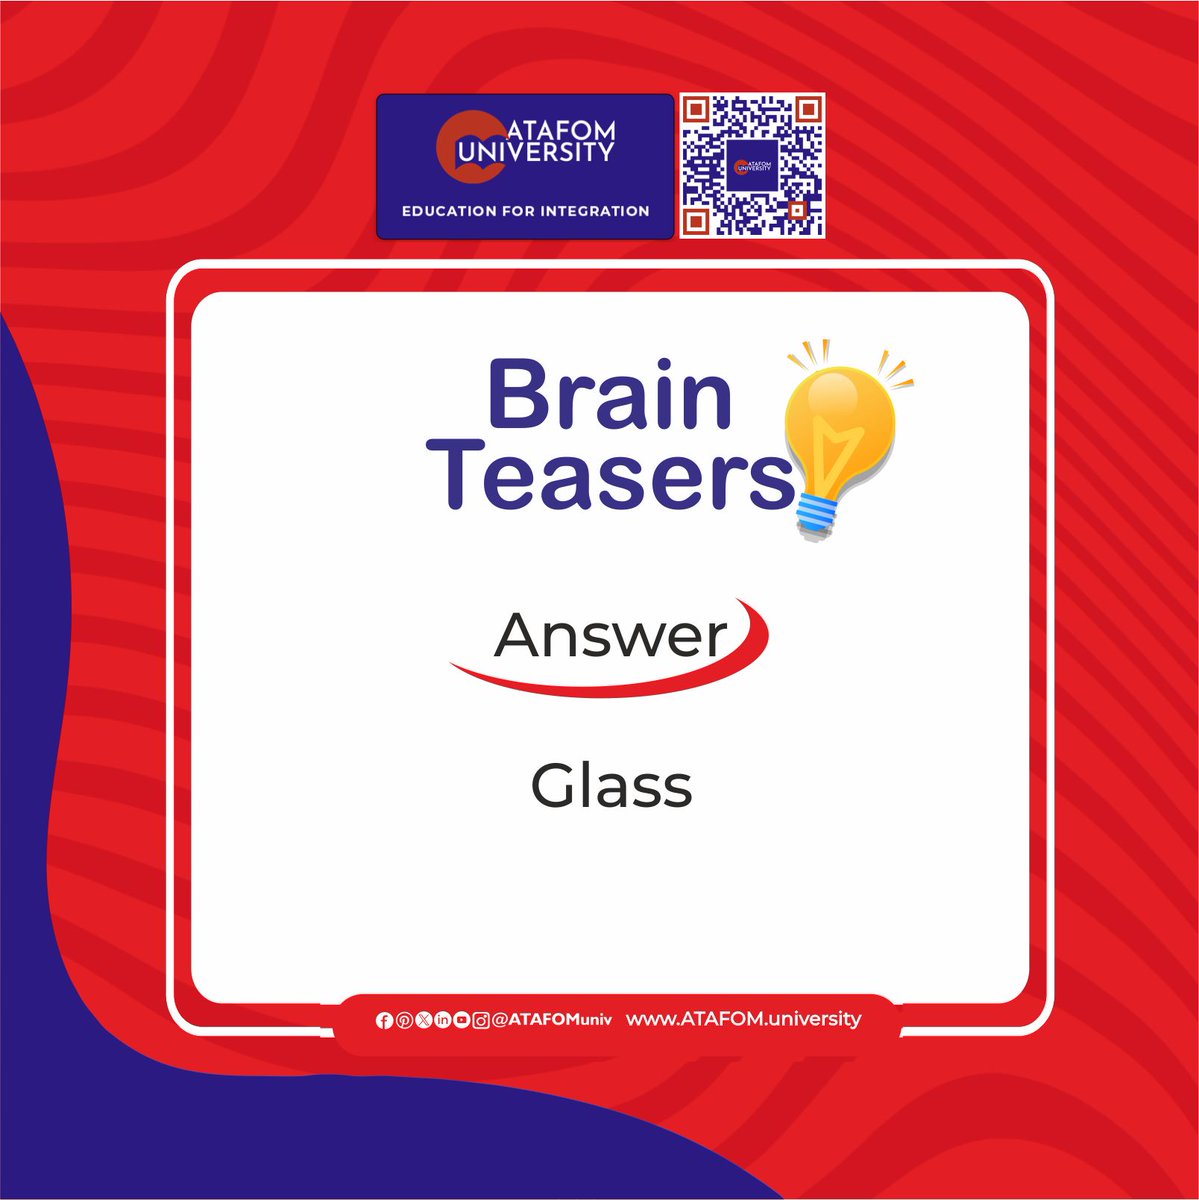 Exercise your mind with our latest brain teaser challenge!
Can you solve it? 
Test your wits and sharpen your cognitive skills with ATAFOM University. 

#BrainTeaser #MindChallenge #PuzzleFun #CriticalThinking #BrainGames #UniversityLife #ATAFOMonlinecampus #Learning #Education